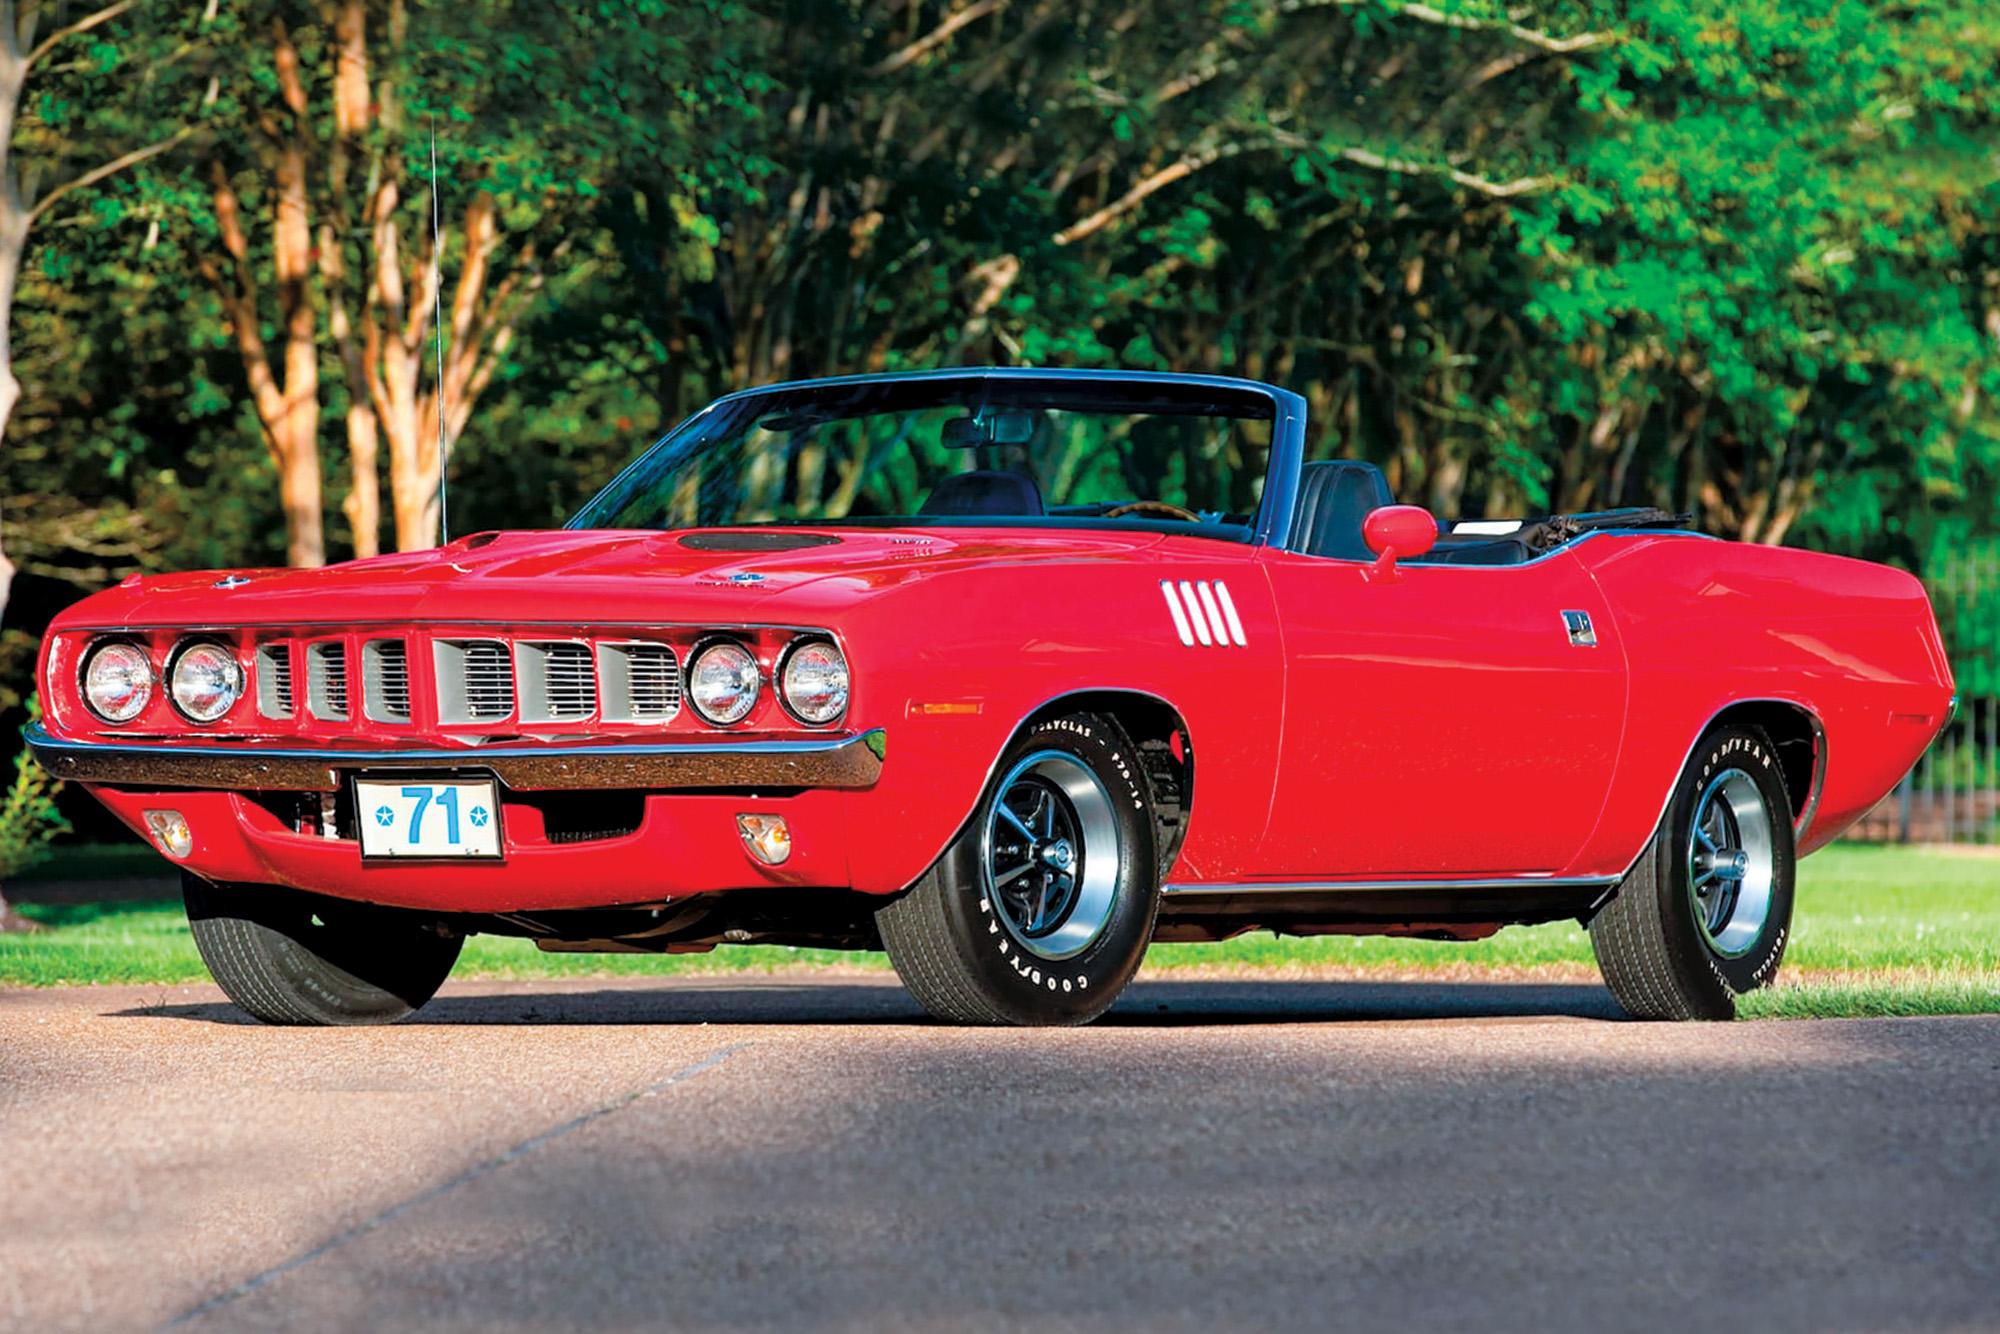 Will a California-dreamy sale price lead to increased values for the Plymouth 'Cuda?